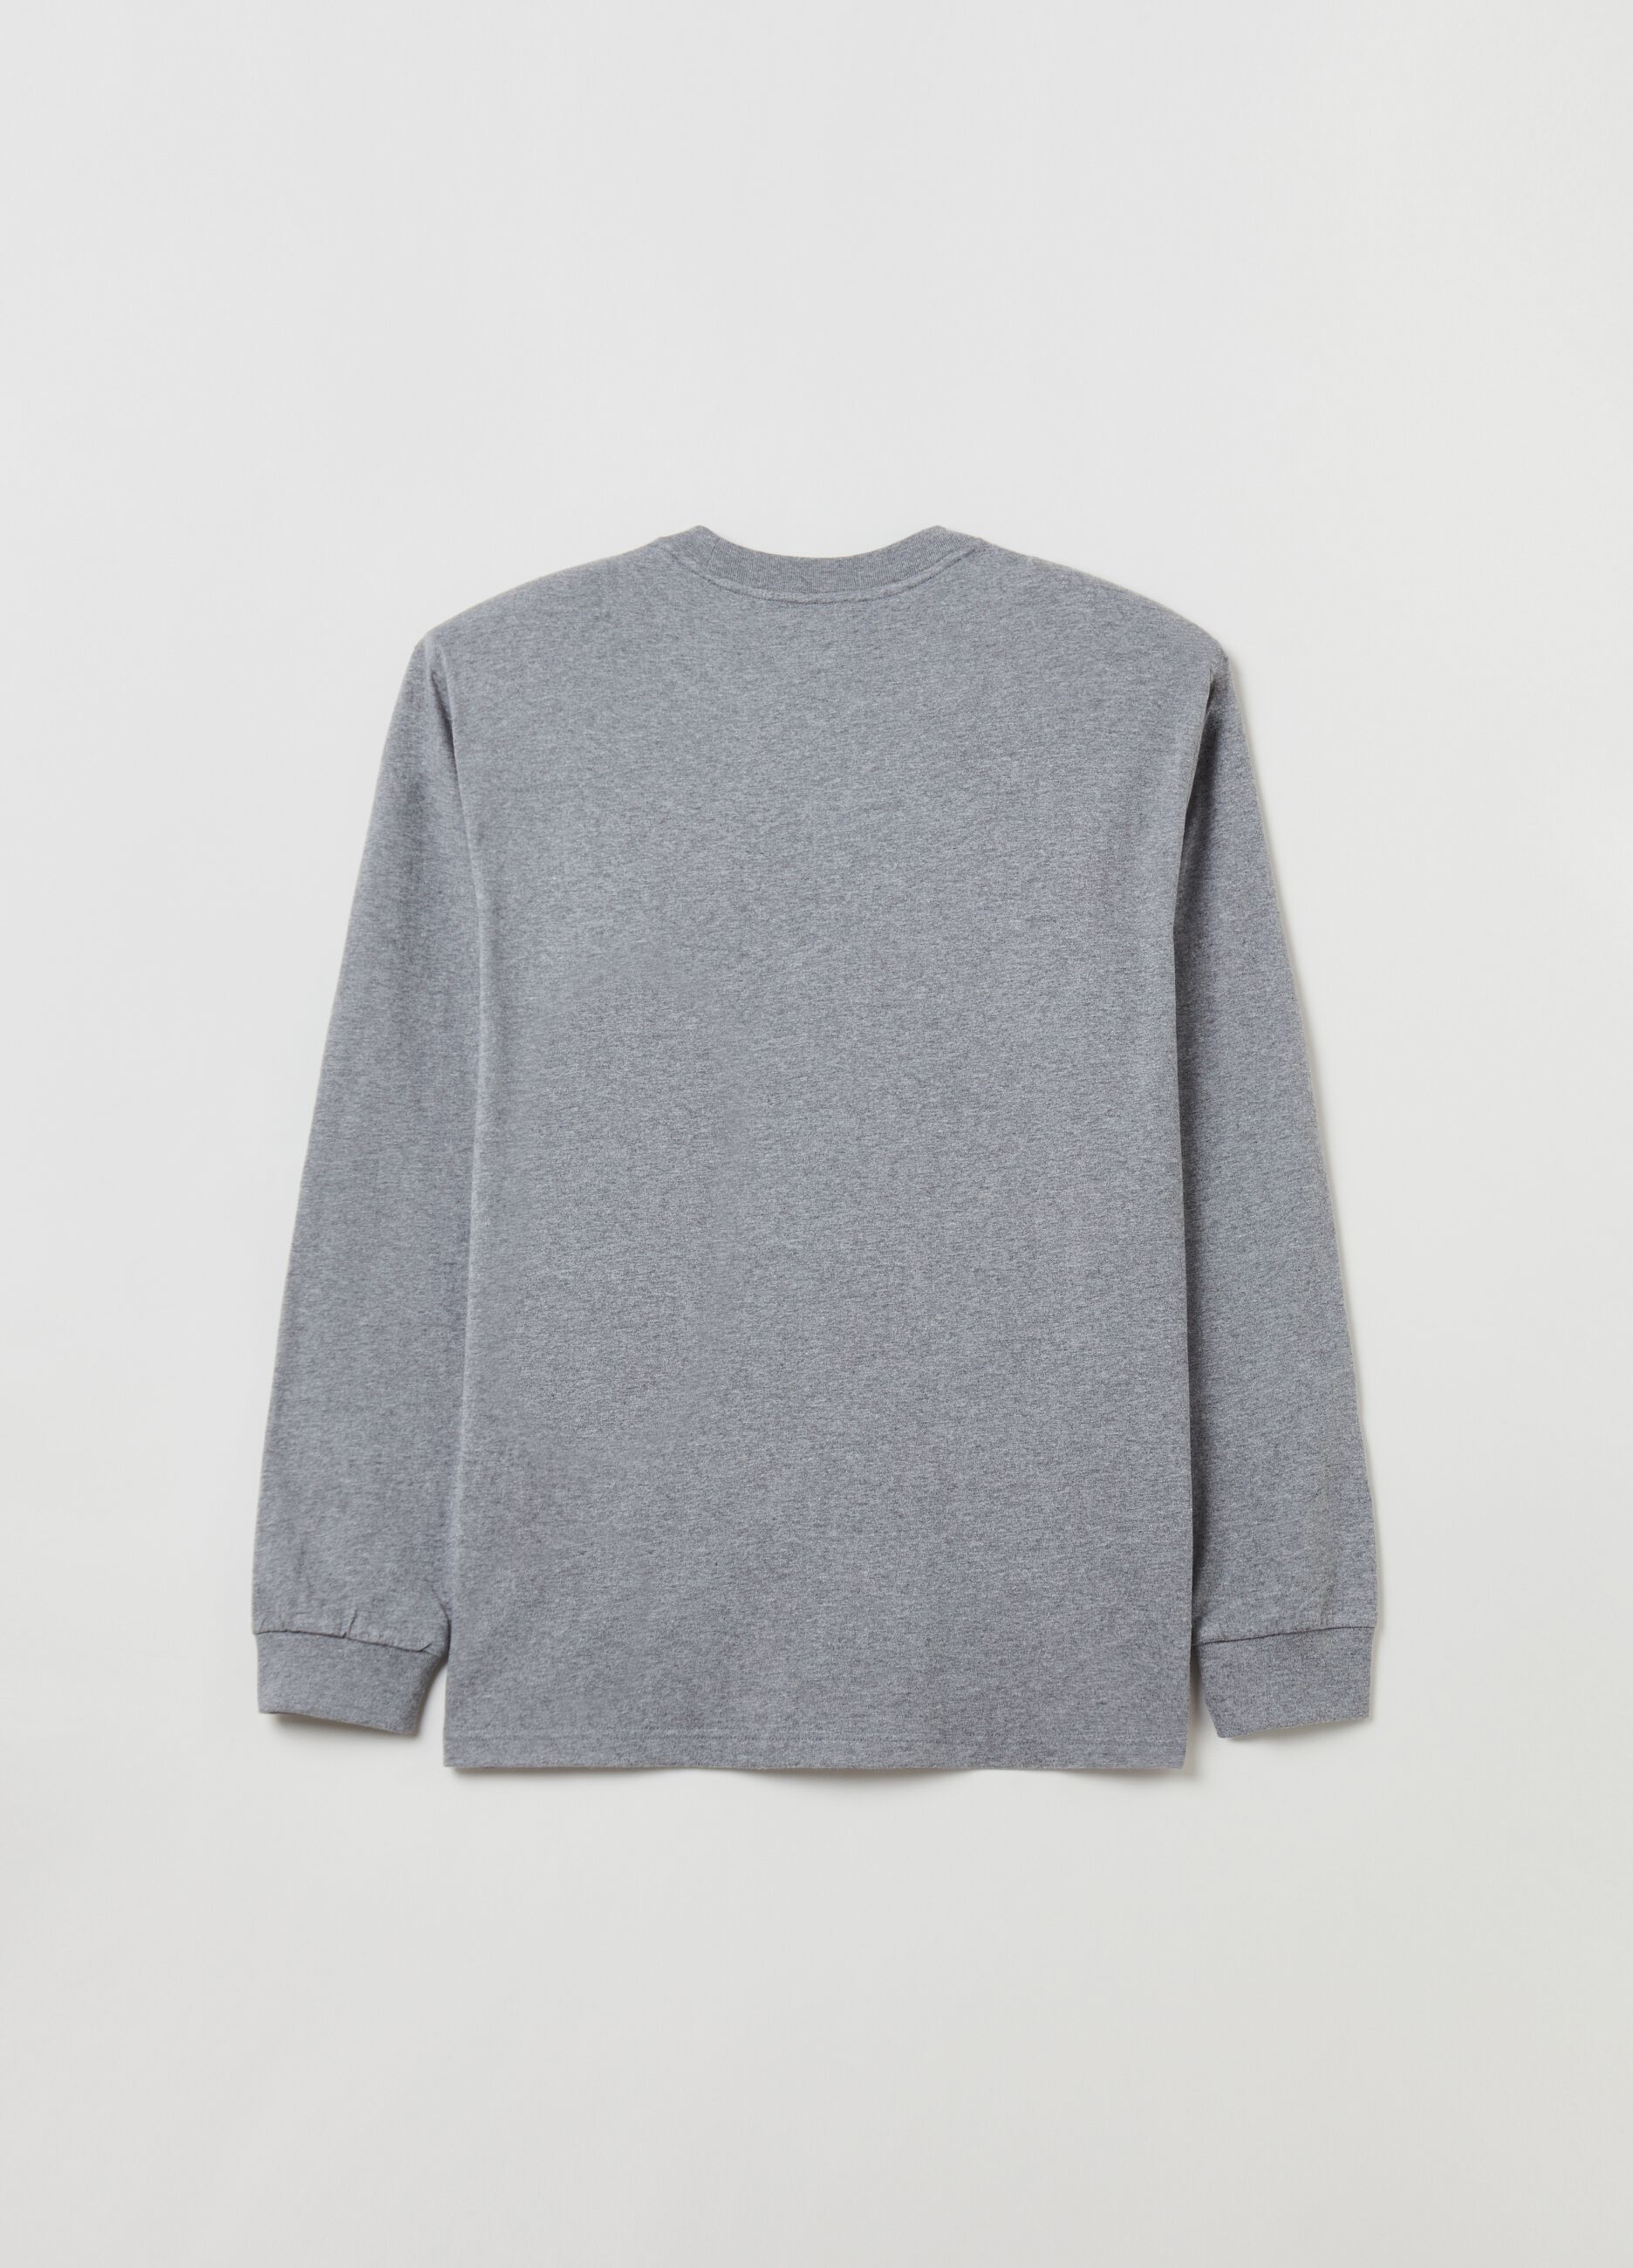 Long-sleeved T-shirt in organic cotton._2